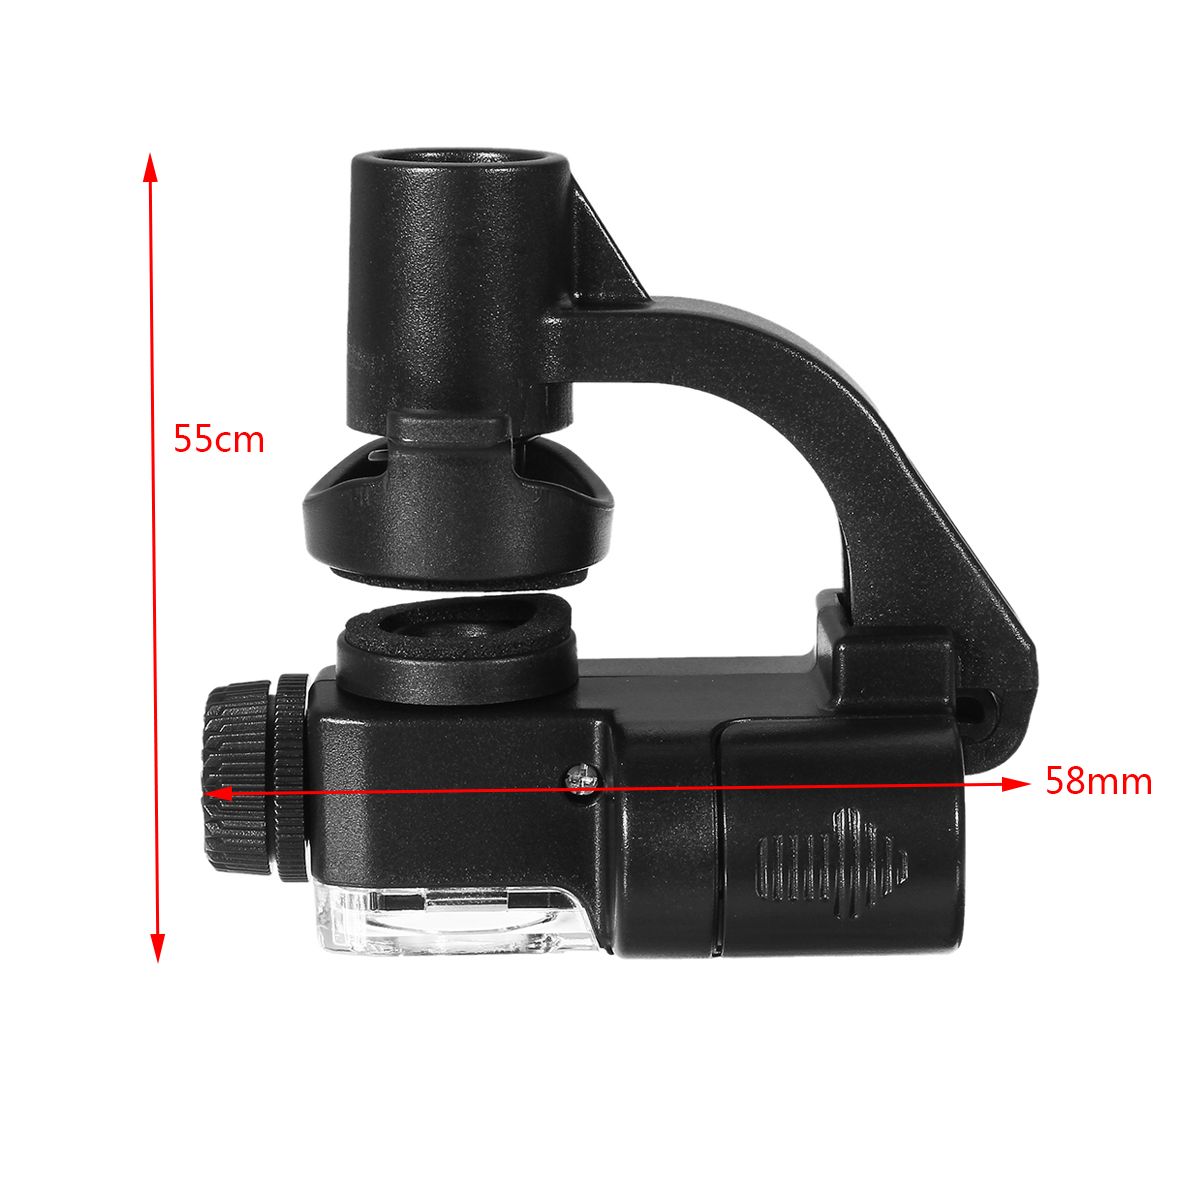 Optical-Zoom-Magnifier-Microscope-90X-Magnification-Phone-Clip-With-LED-UV-Light-1263033